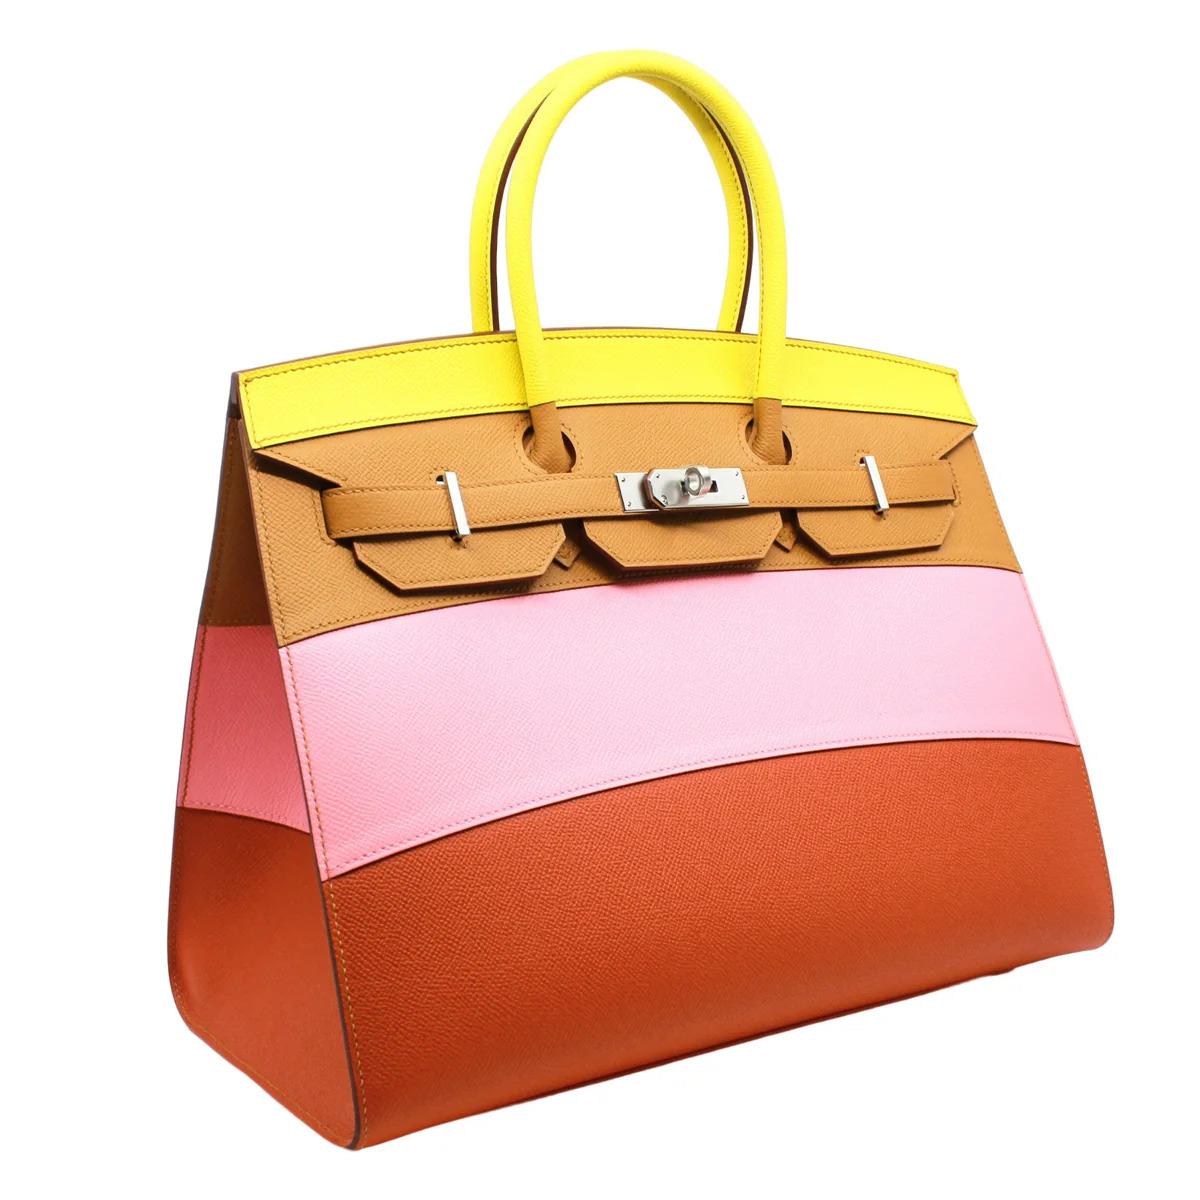 1stdibs Exclusives From Three Over Six

Brand: Hermès 
Style: Birkin Sellier
Size: 35cm 
Color: Lime / Rose Confetti / Sesame / Terre Battue
Leather: Epsom
Hardware: Palladium
Stamp: 2021 Y

Condition: Pristine, never carried: The item has never